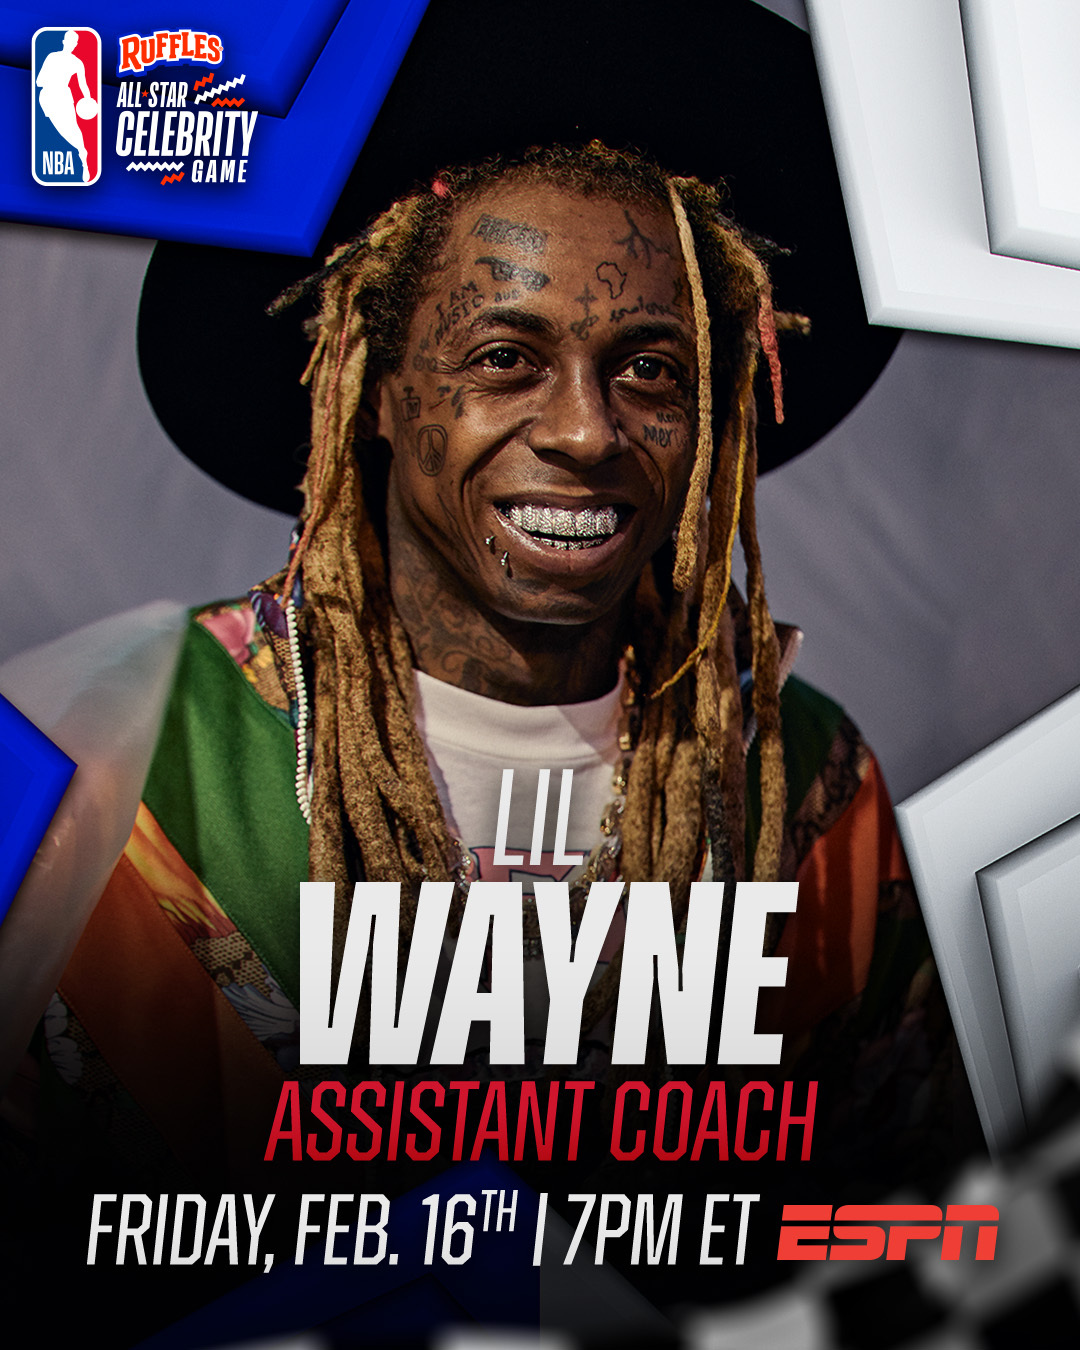 50 Cent & Lil Wayne To Help Coach At All-Star Celebrity Game